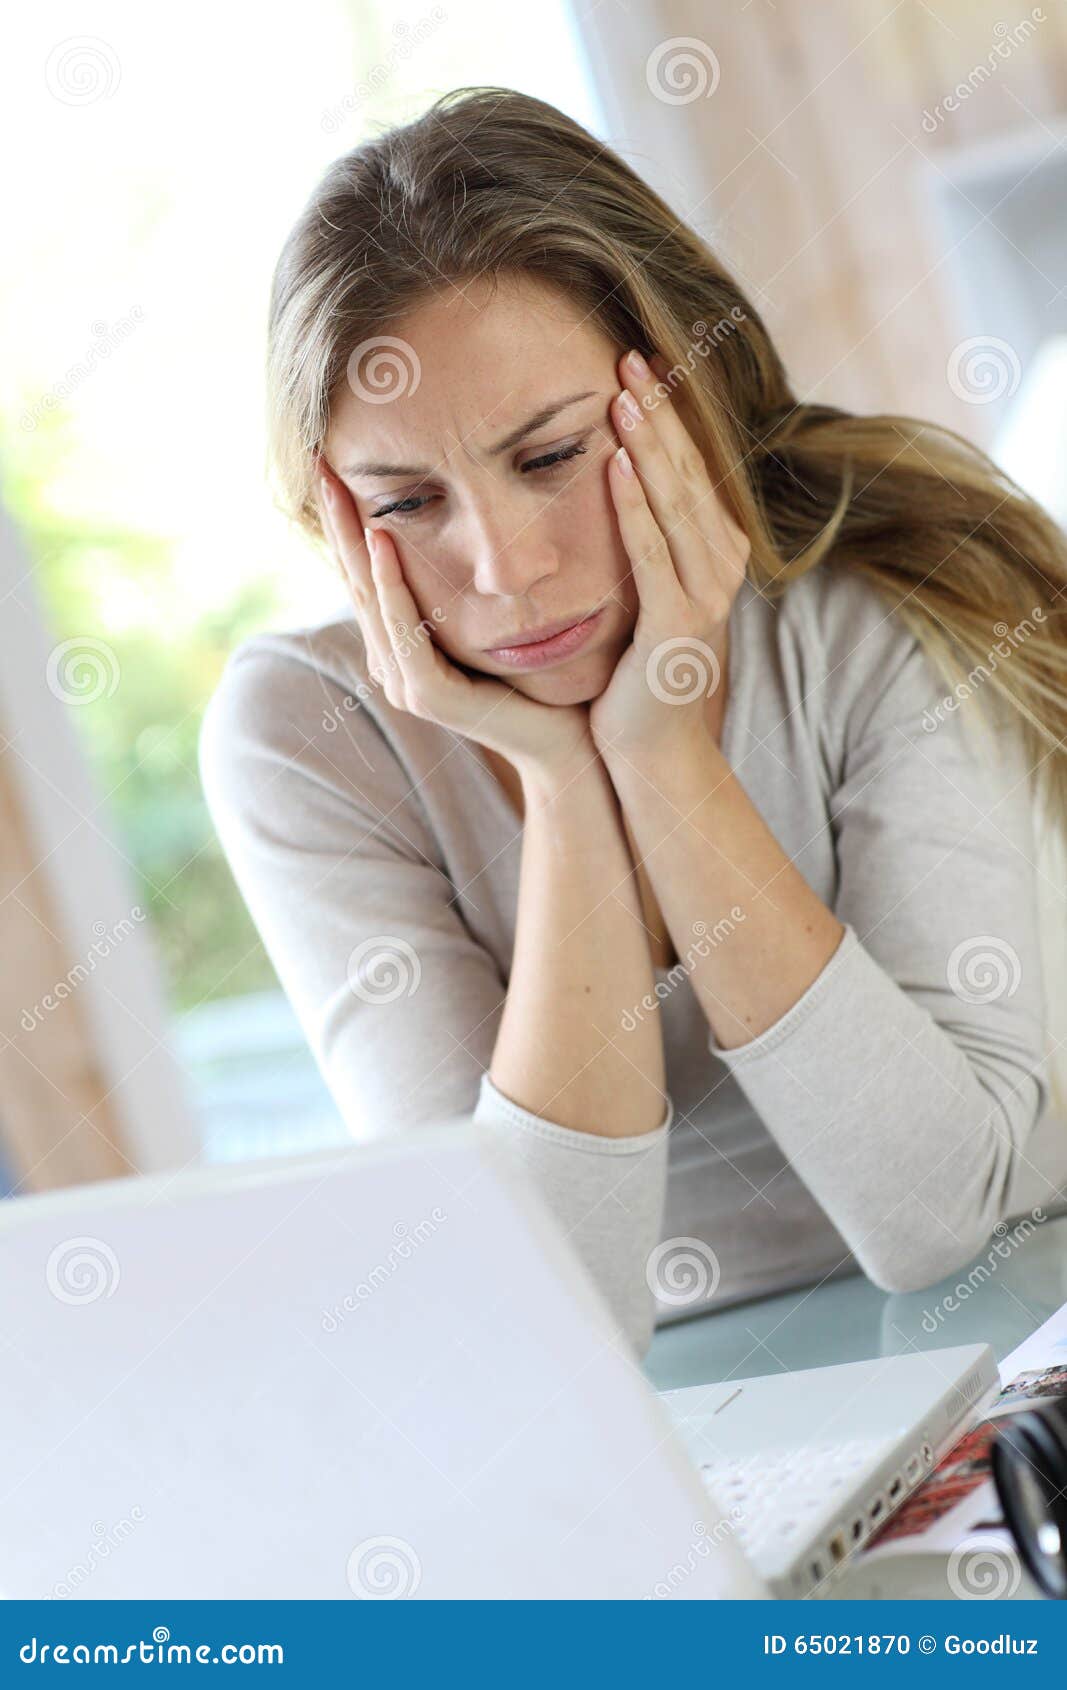 woman working on laptop getting tired